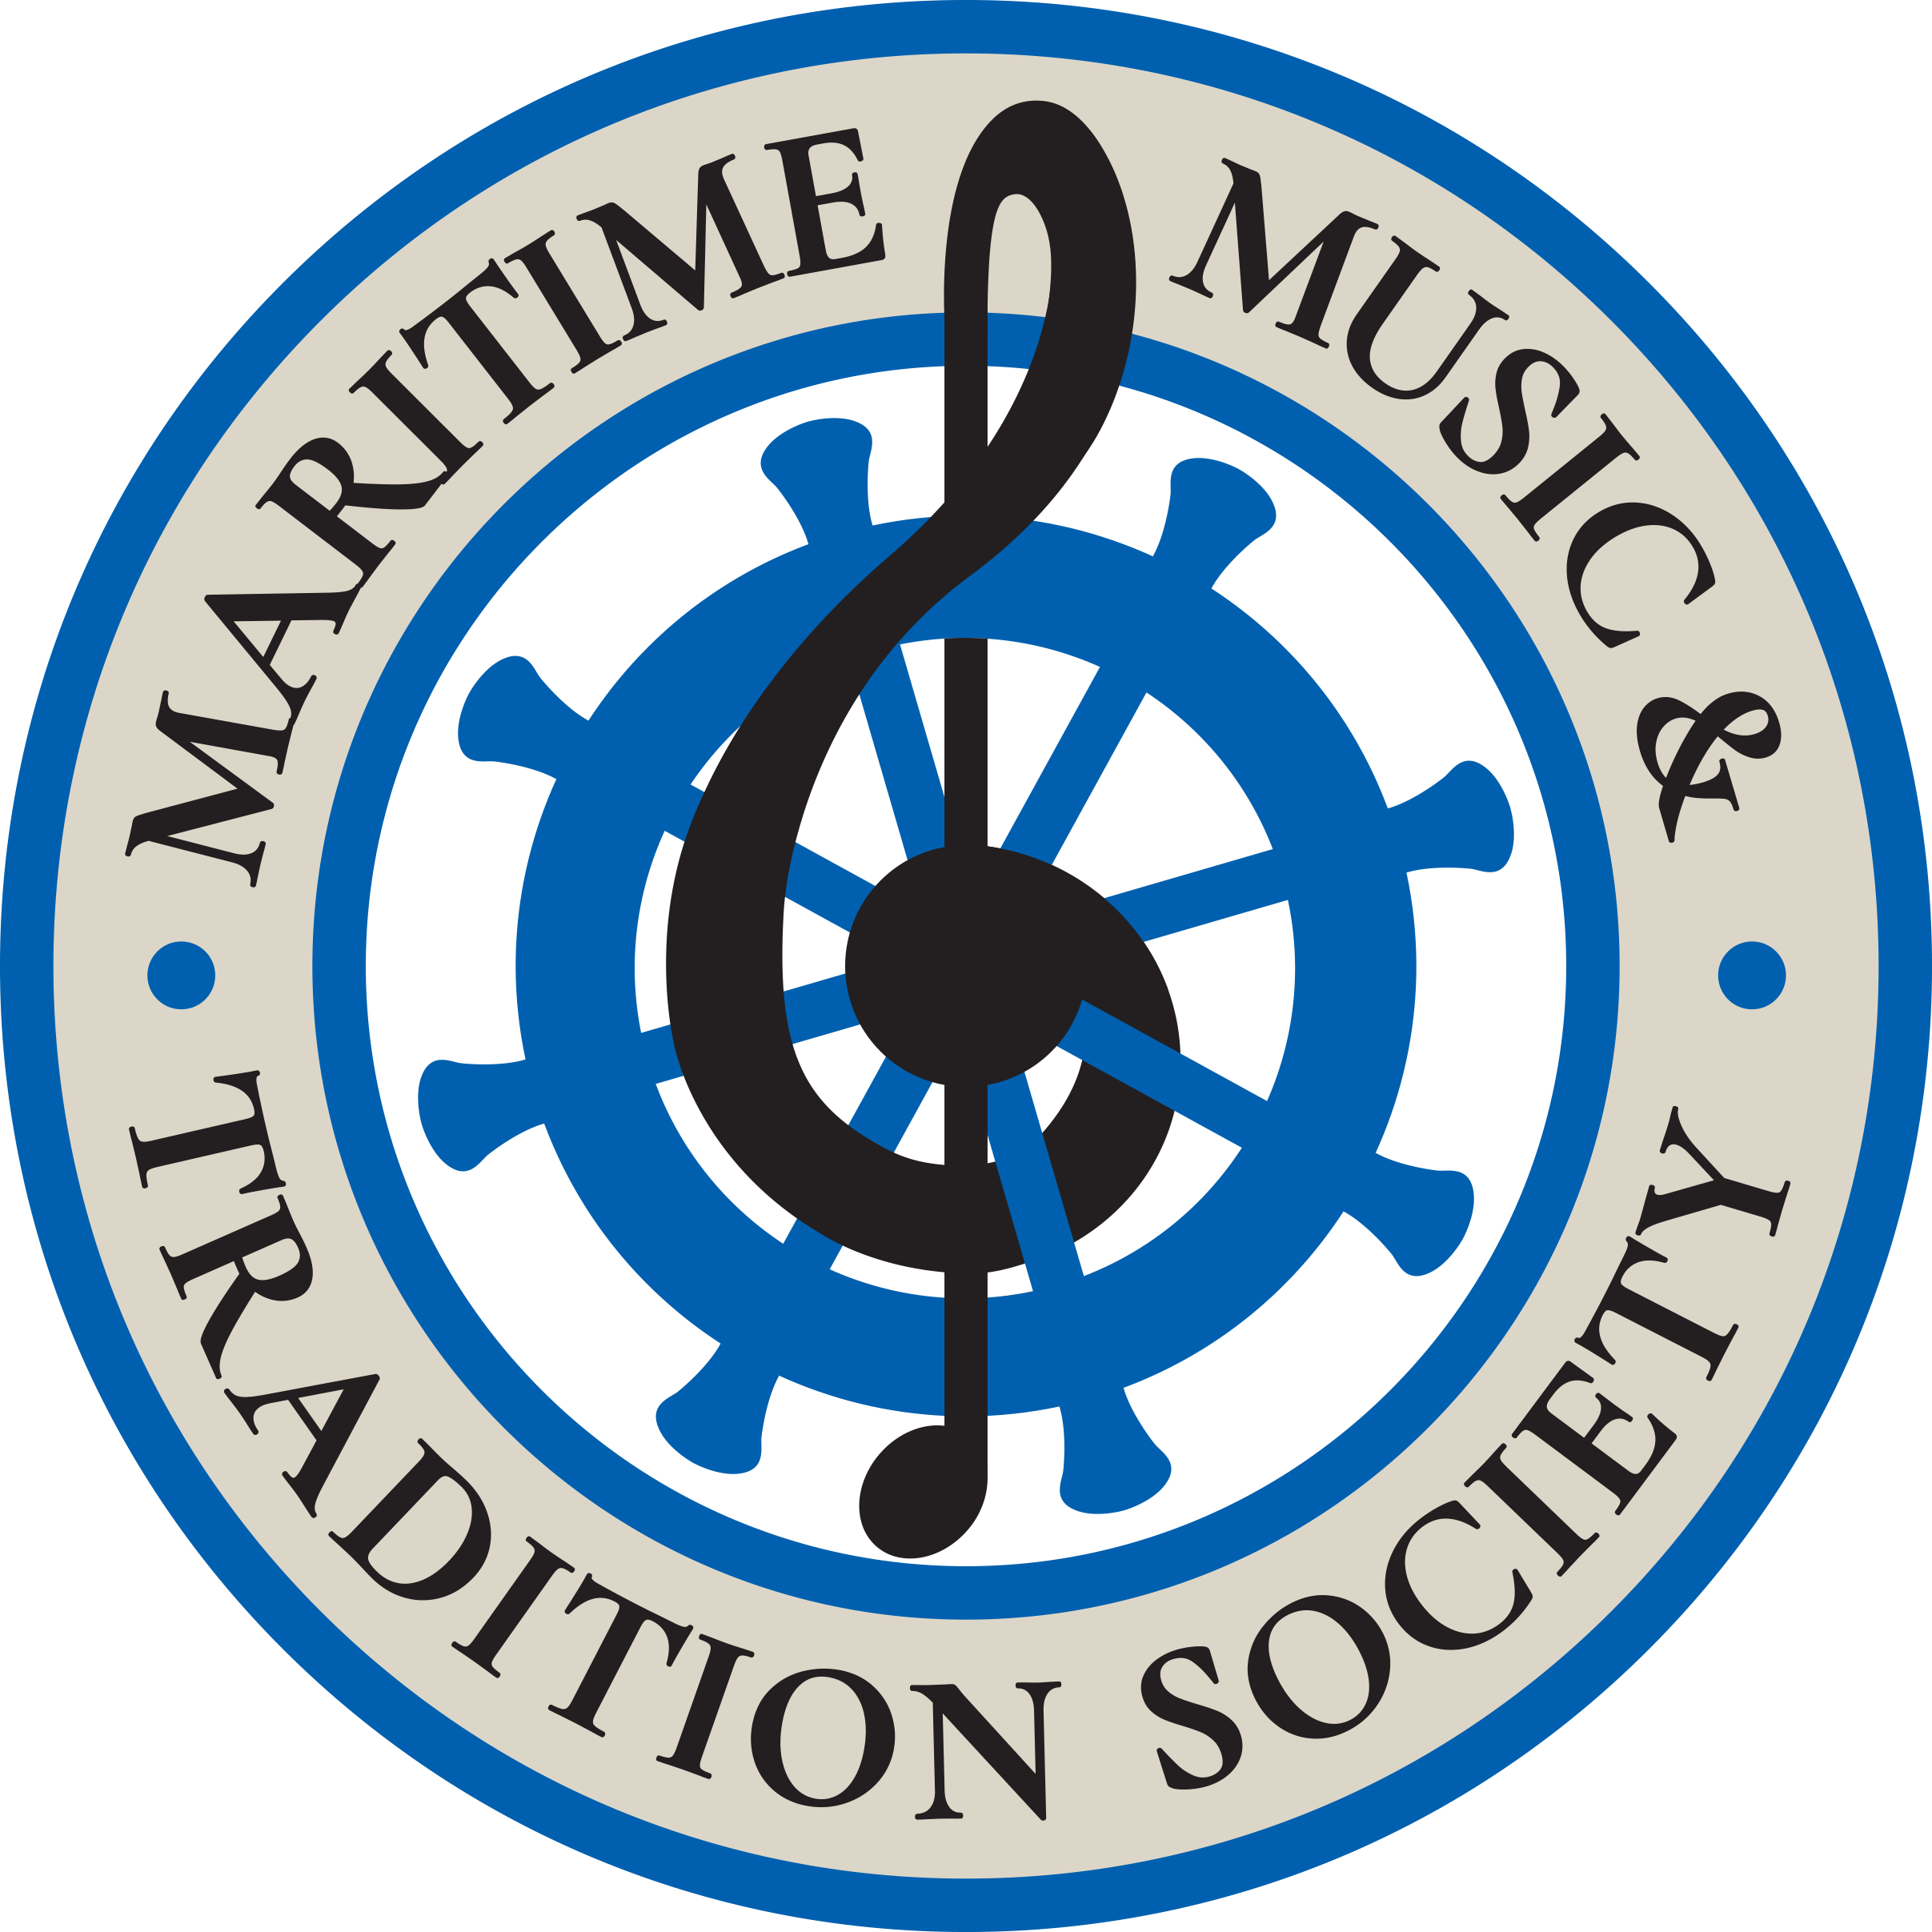 Logo of the Maritime Music & Tradition Society, an image of a treble clef intertwined with a ship's wheel.